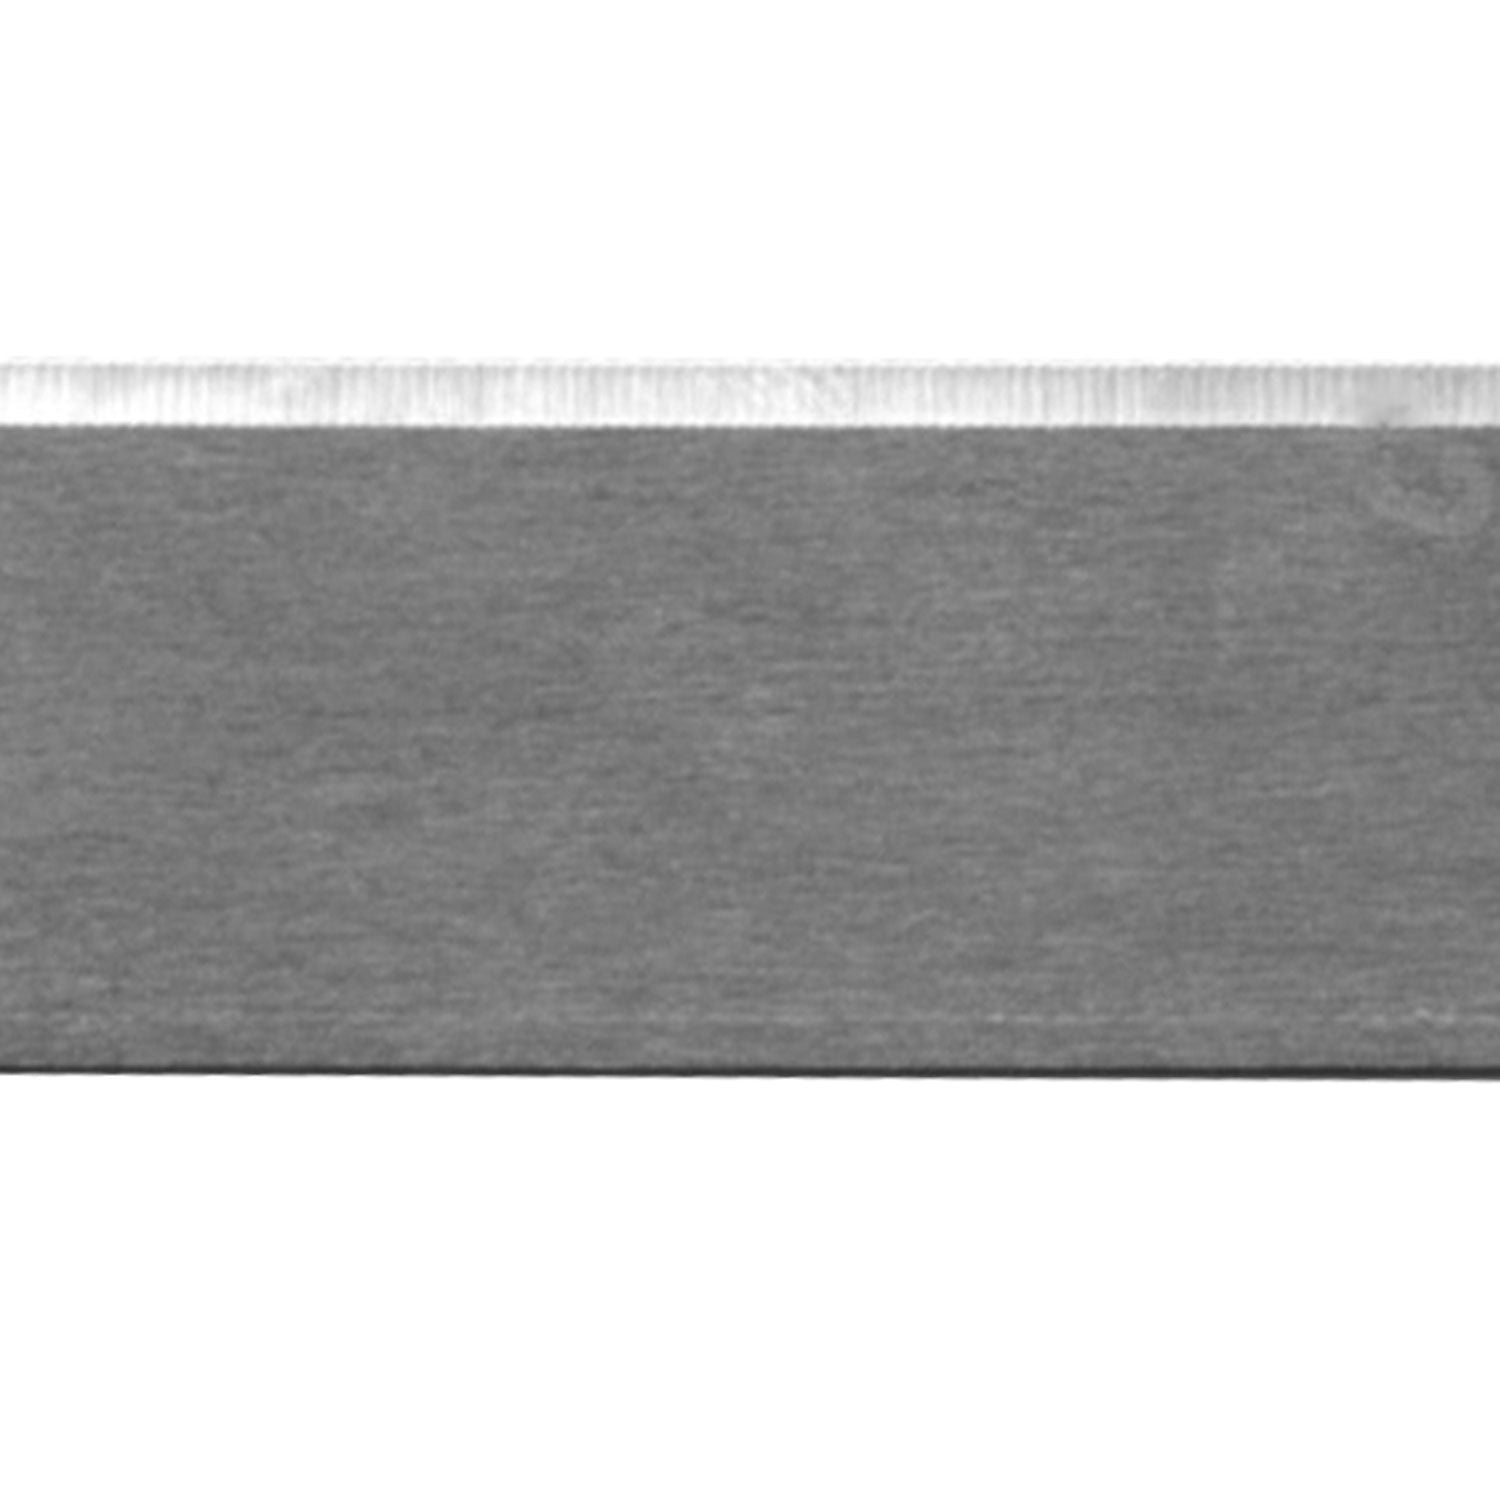 Meat Slicer Blades - Knife Edge - Made to fit Grasselli Machines - 435mm 5/8 in. x 0.0222 in. - Pack of 25